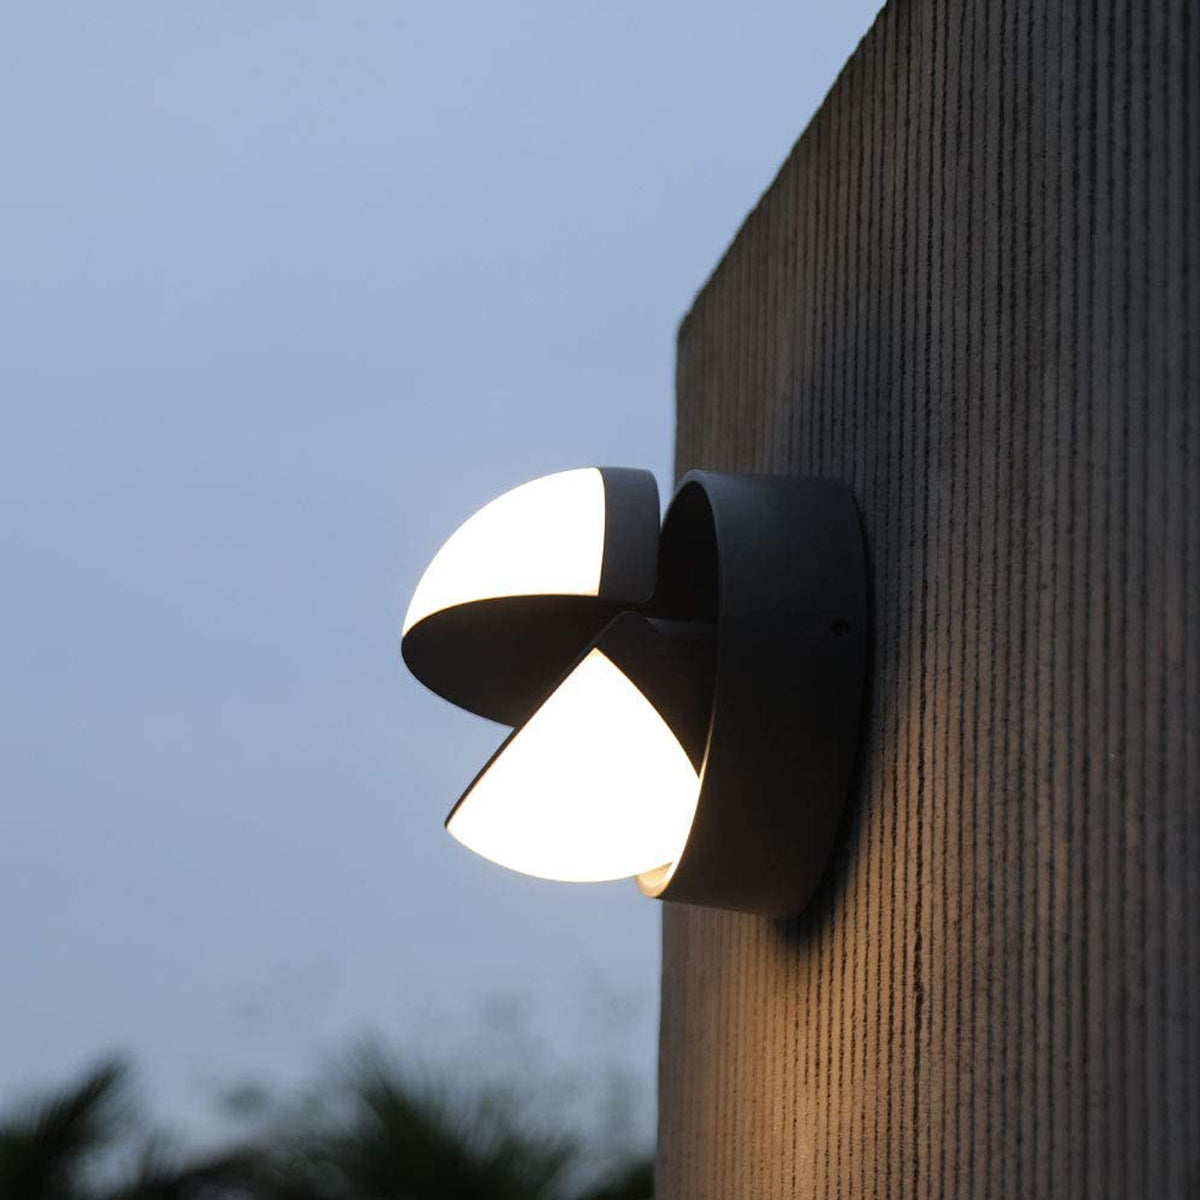 Our Kayla dark grey outdoor half moon wall light would look perfect in a modern or more traditional home design. Outside wall lights can provide atmospheric light in your garden, at the front door or on the terrace as well as a great security solution. It is designed for durability and longevity with its robust material producing a fully weatherproof and water resistant light fitting. Use LED bulbs to make this light energy efficient and low cost to run